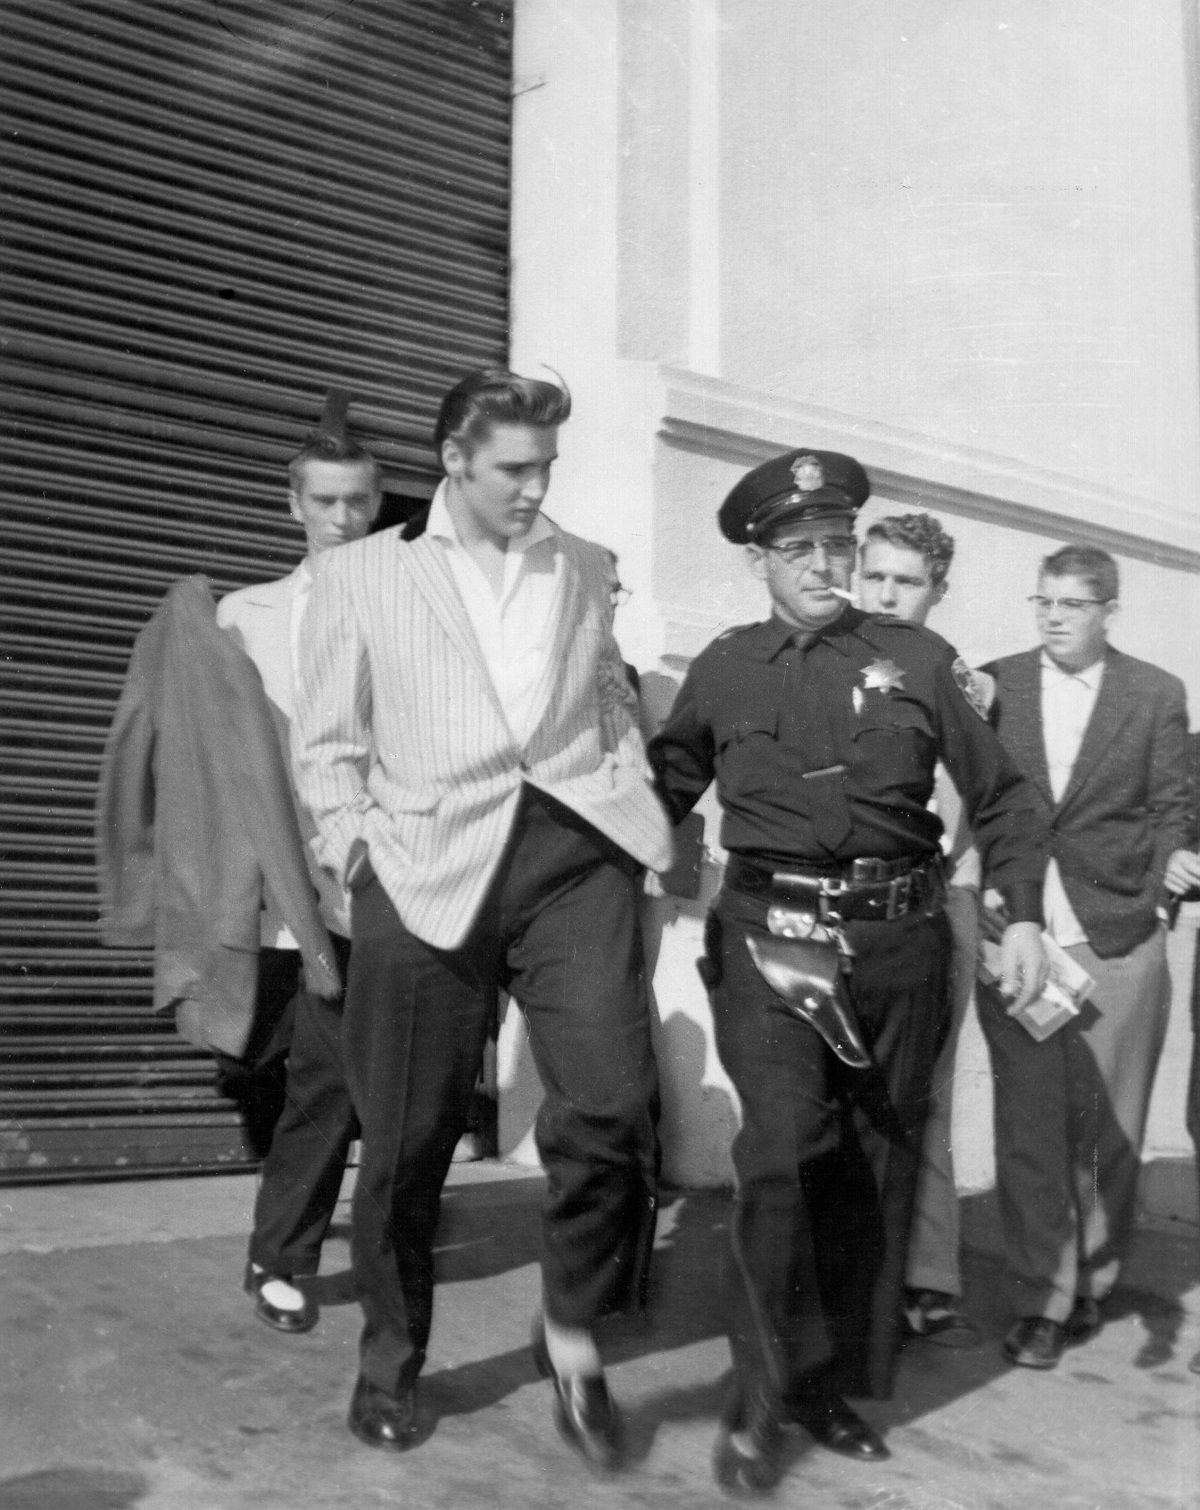 Elvis Presley with police and security in 1956